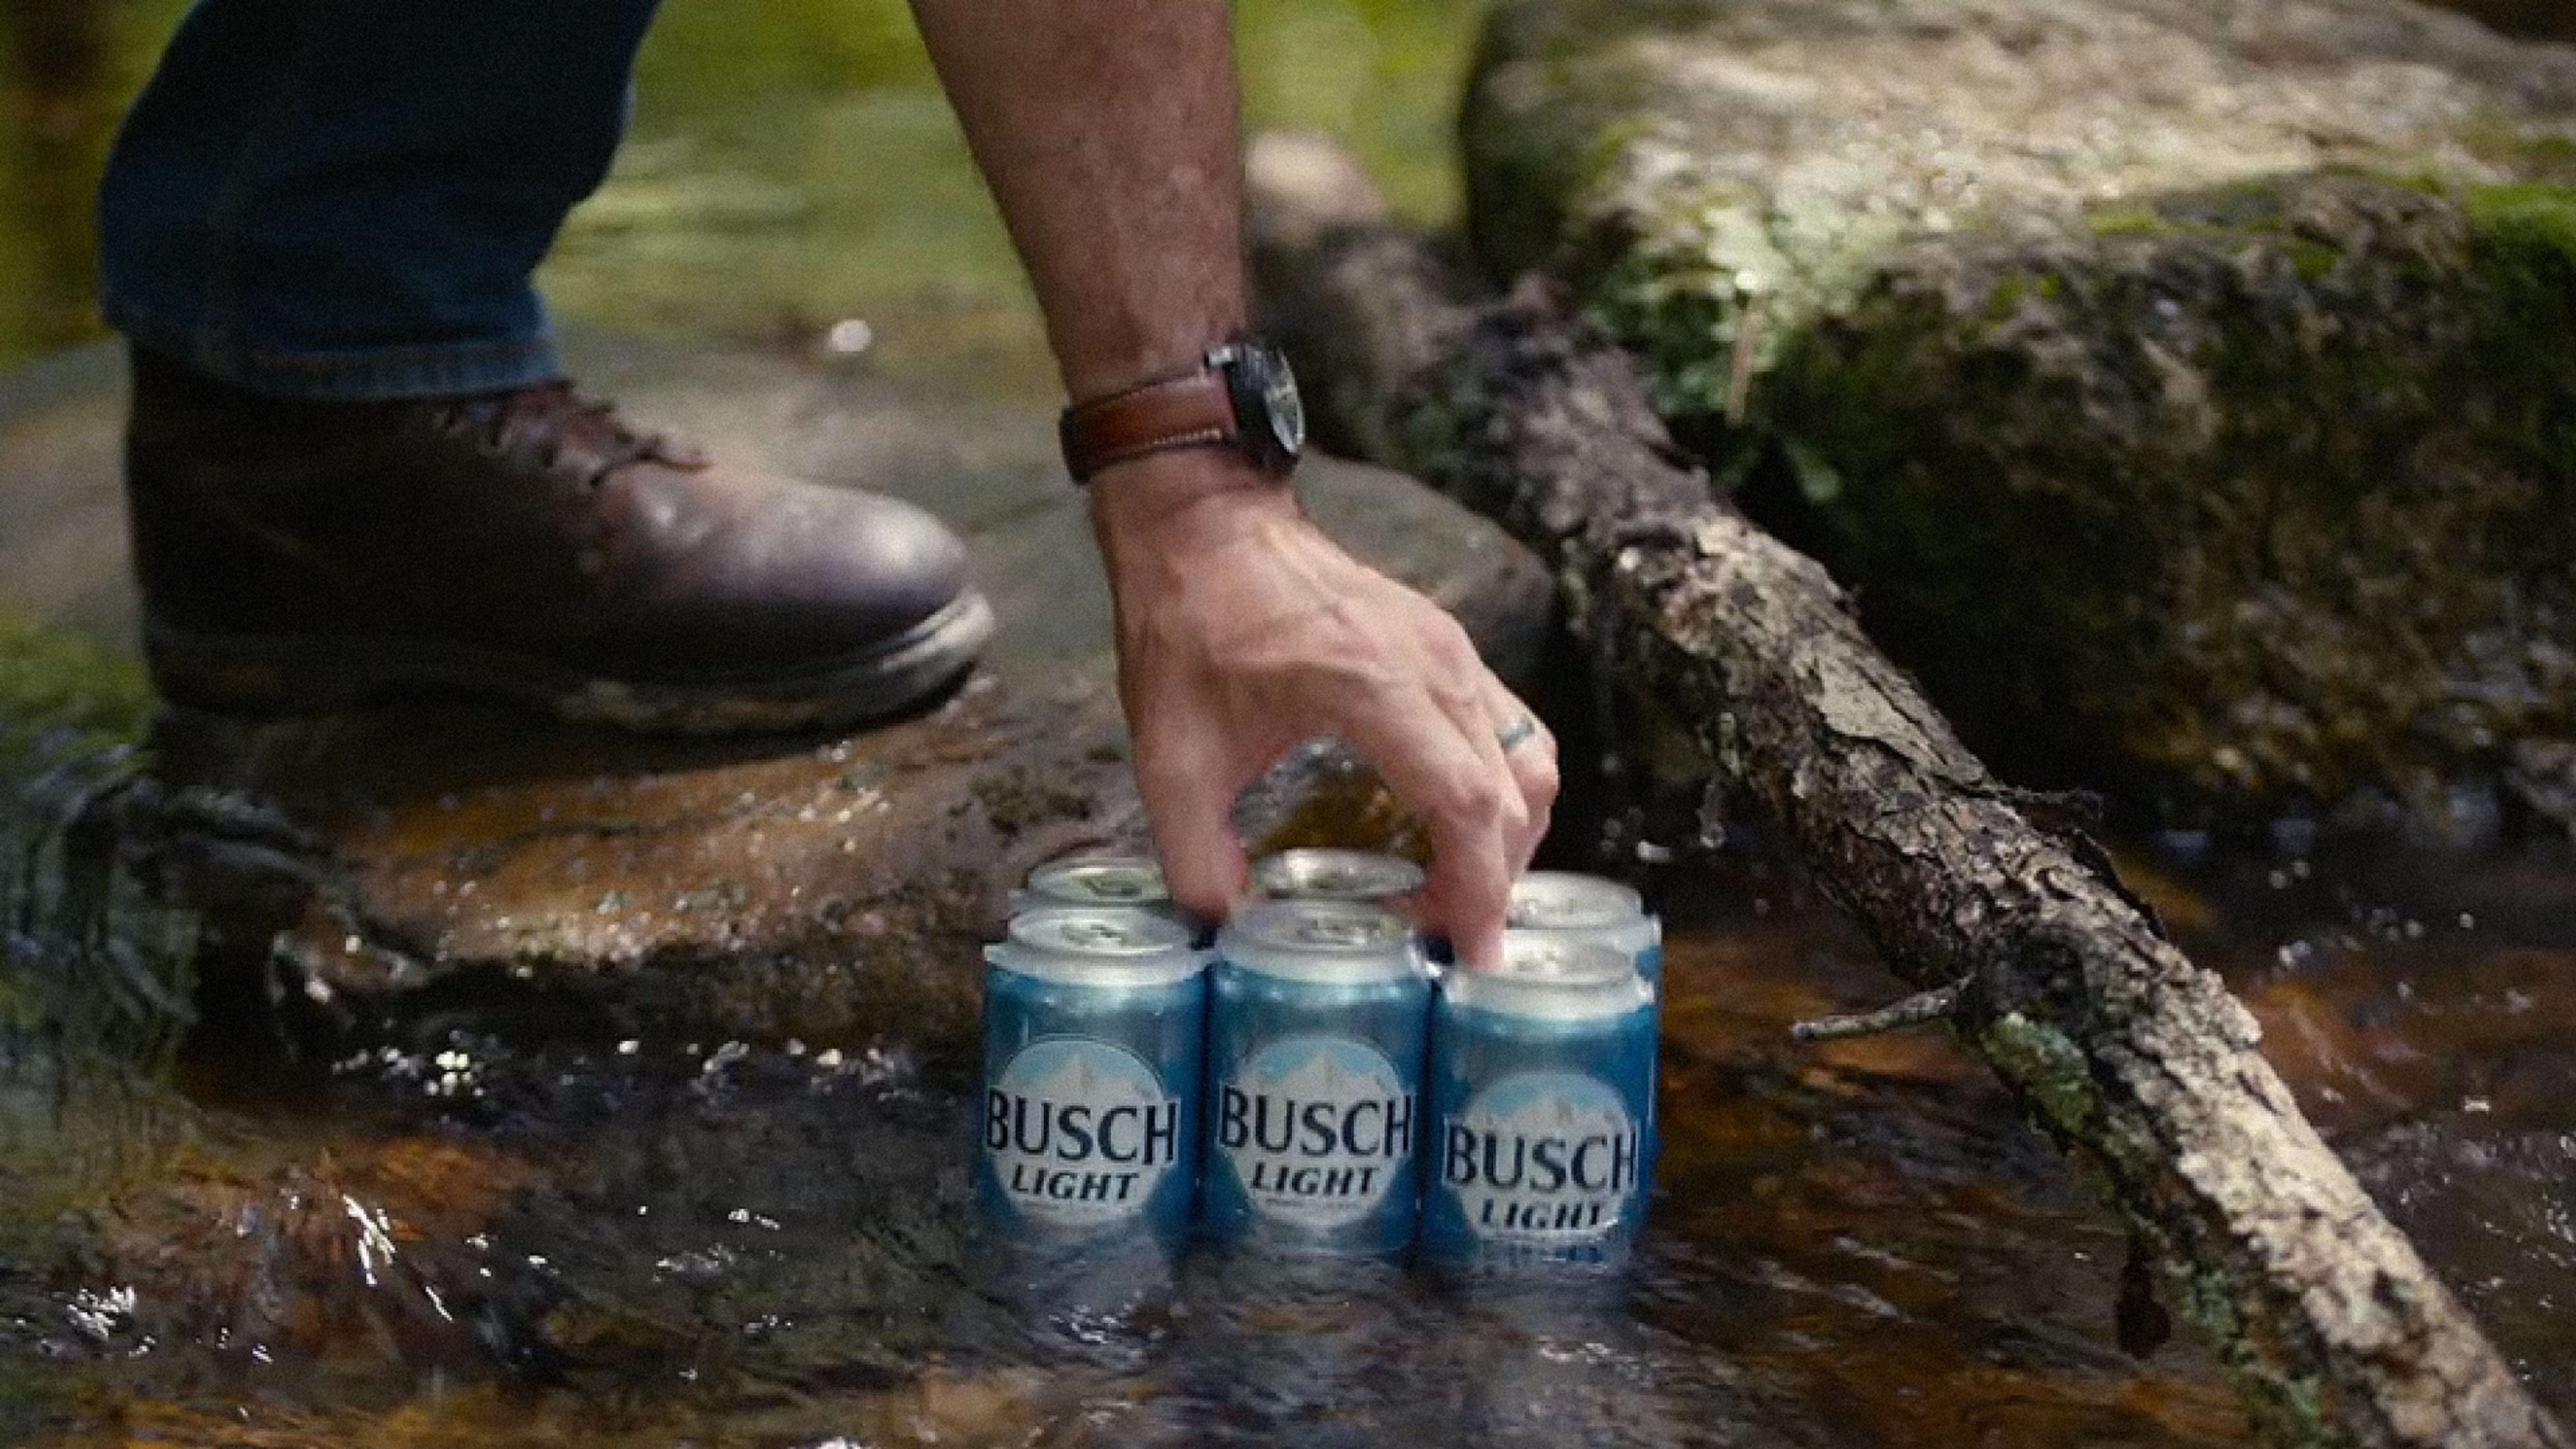 Busch wants to save forests with the promise of unlimited beer